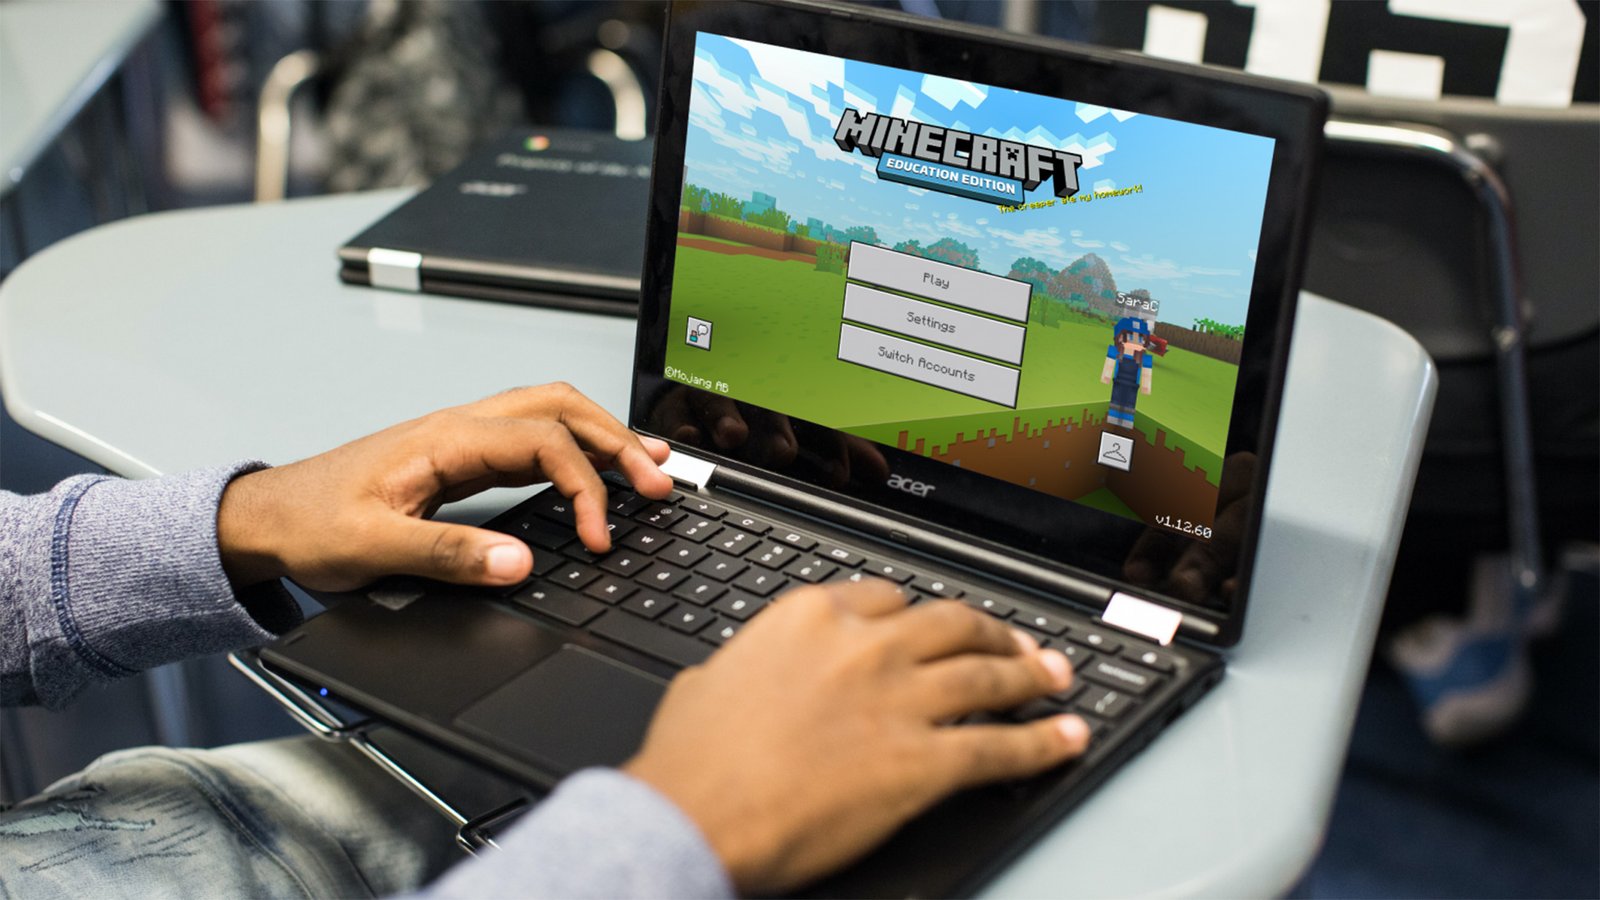 Microsoft reveals future of AI in gaming with exciting Minecraft demo